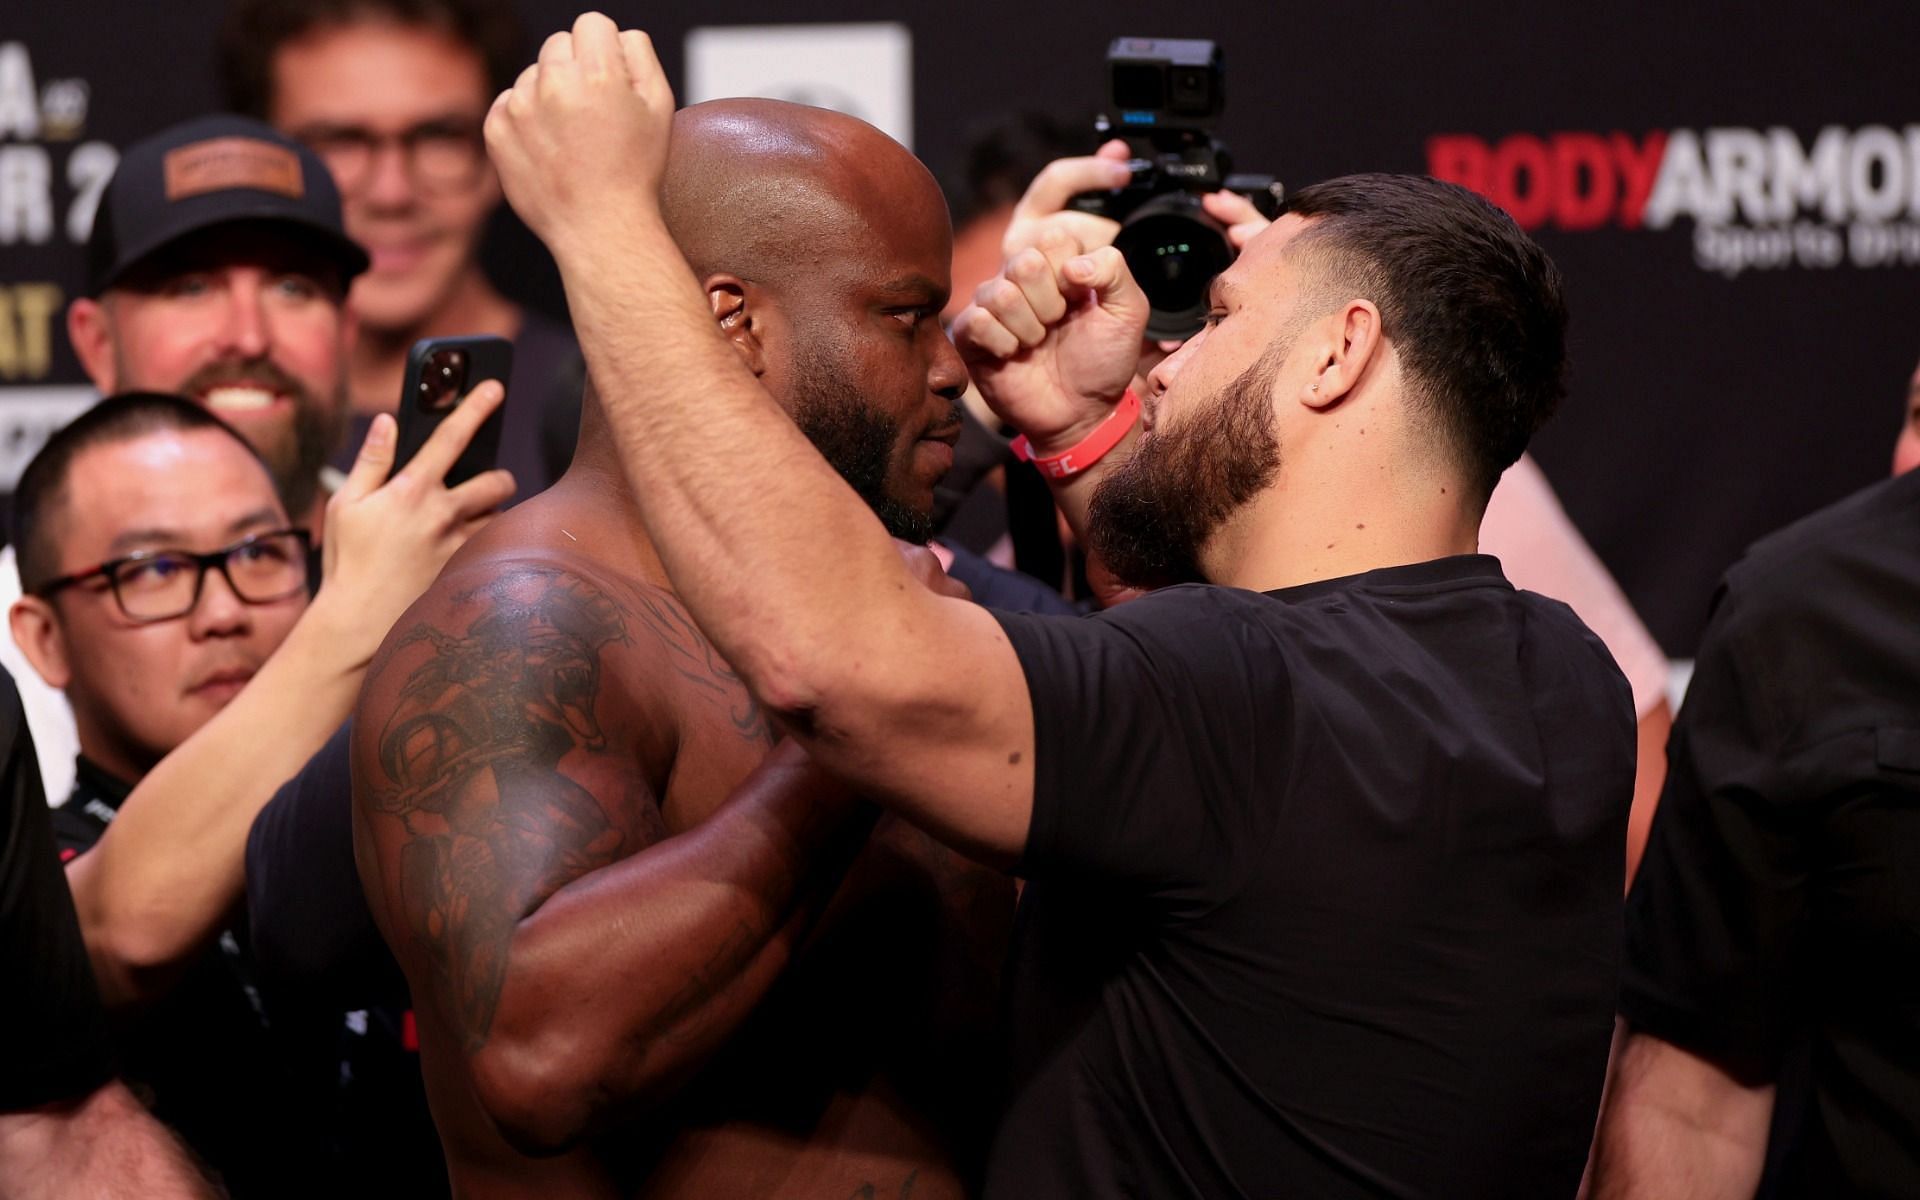 Derrick Lewis (left) and Tai Tuivasa (right) face off after their UFC 271 ceremonial weigh-ins in Houston on Friday